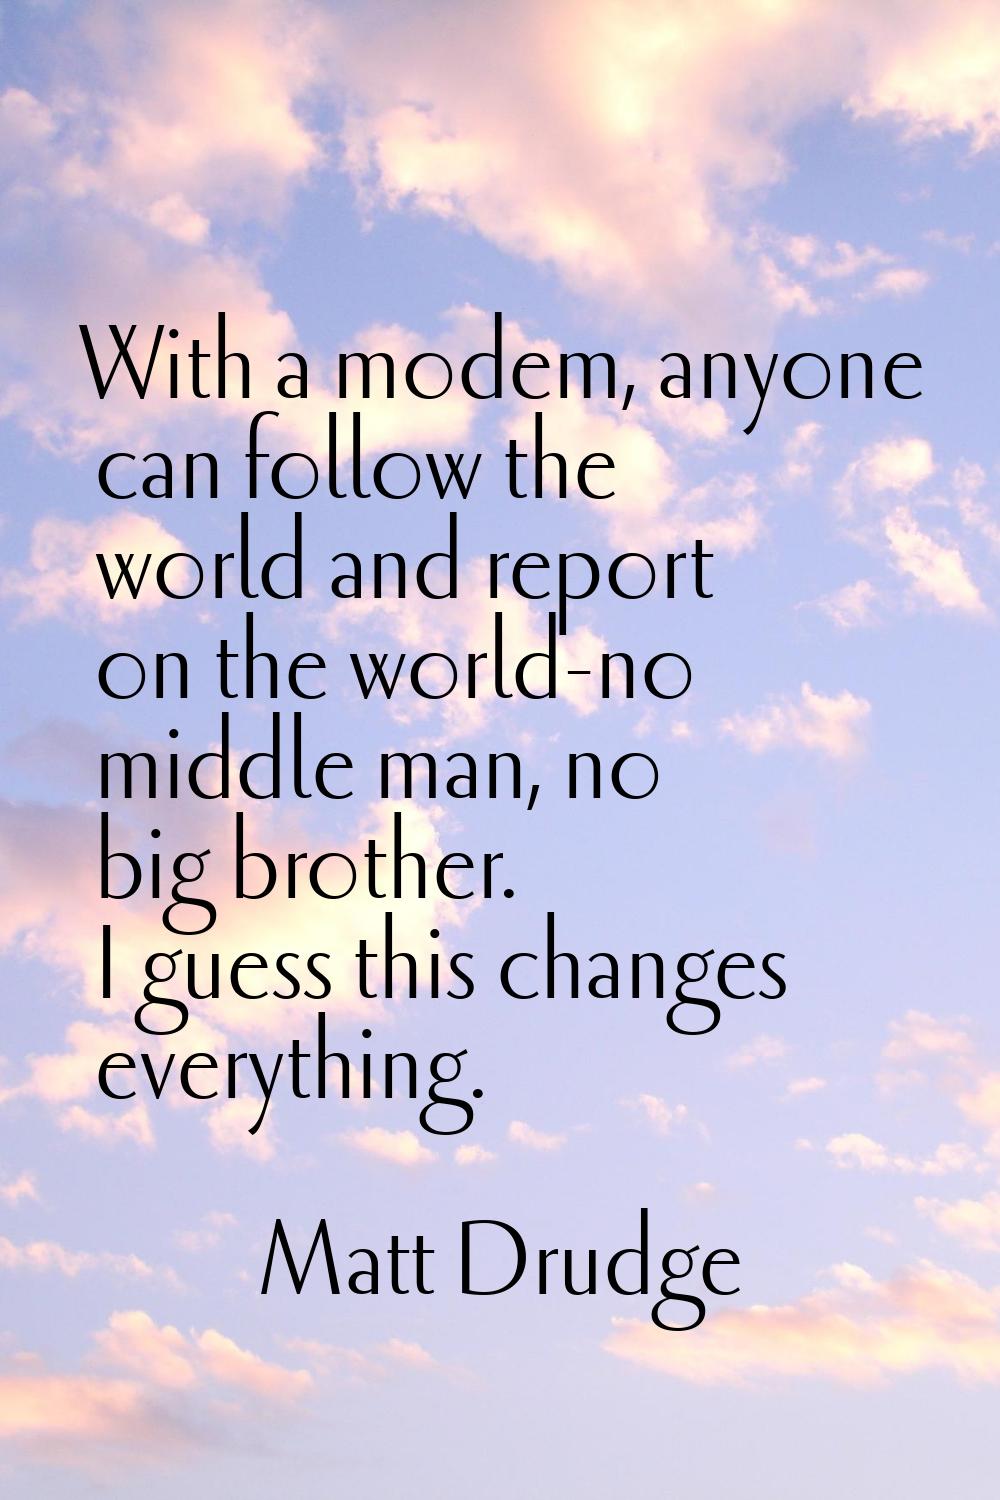 With a modem, anyone can follow the world and report on the world-no middle man, no big brother. I 